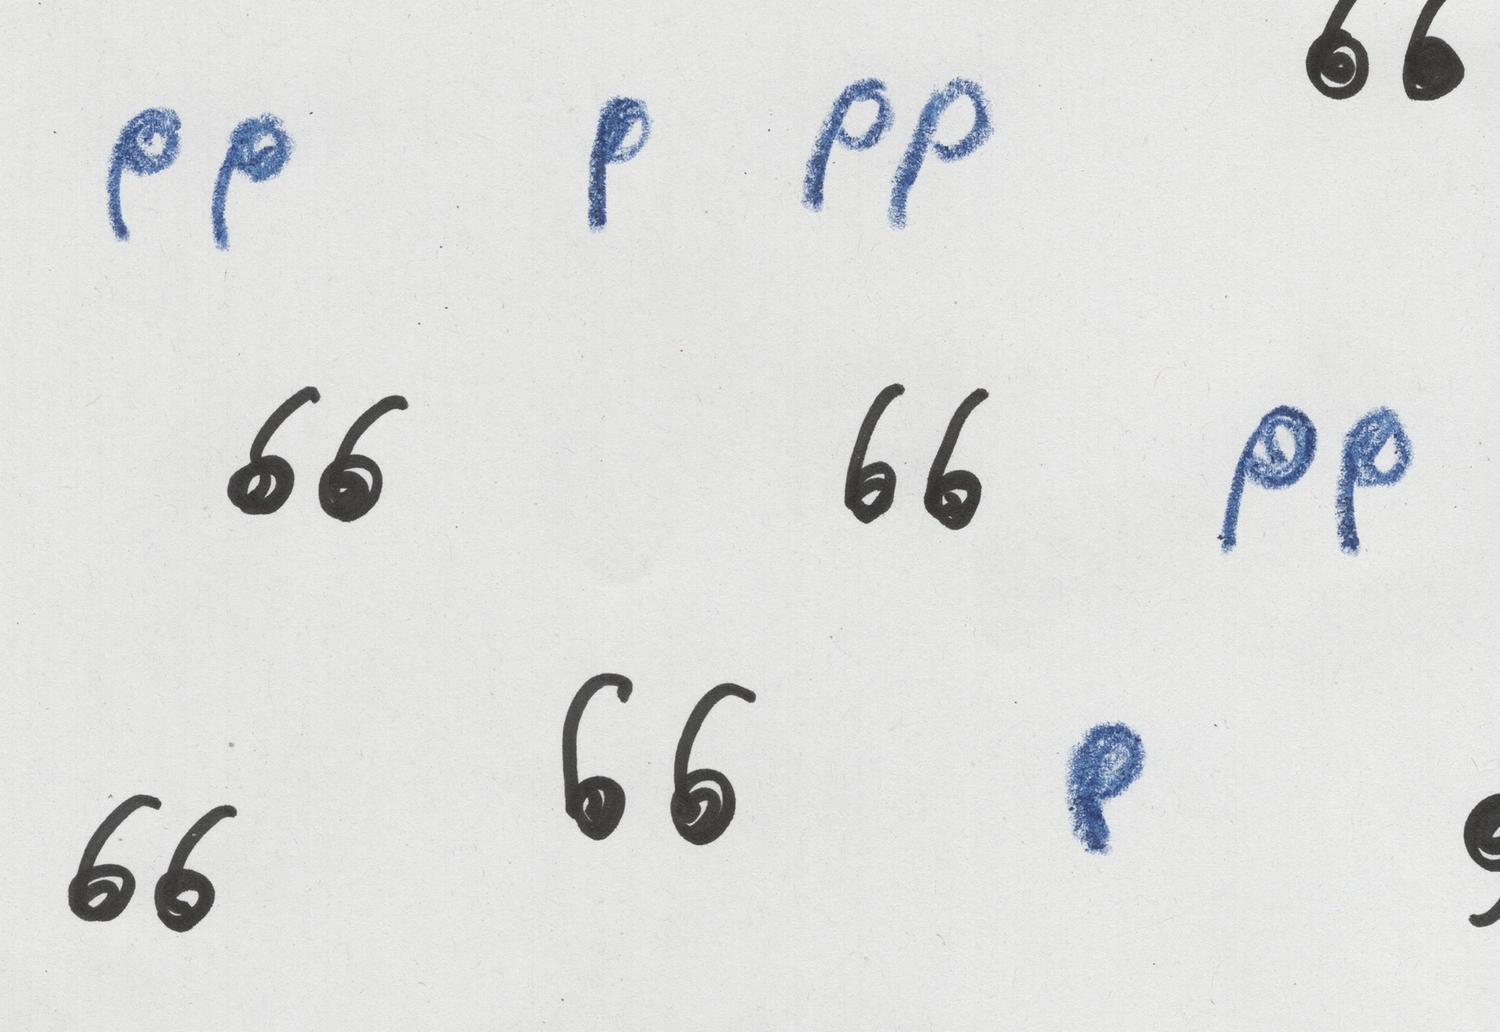 Photograph of hand-drawn quotation marks on paper